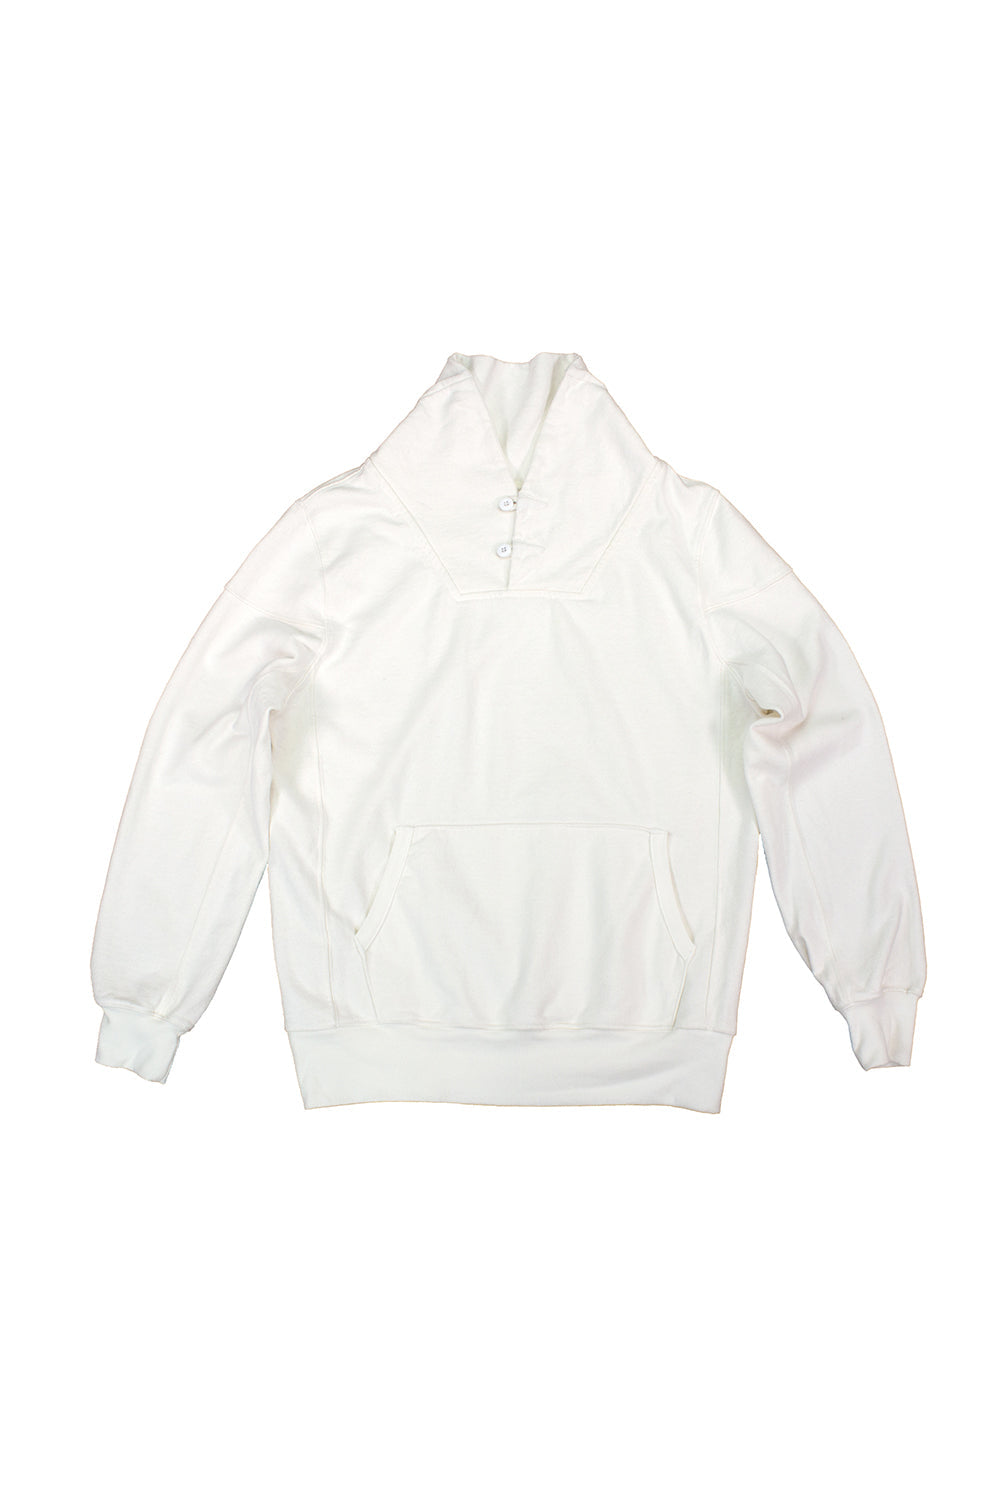 Hemp and organic cotton blend Whittier Sweatshirt by Jungmaven. Made sustainably and made to last, the perfect rugged sweatshirt for crisp early mornings or nights by the fire.